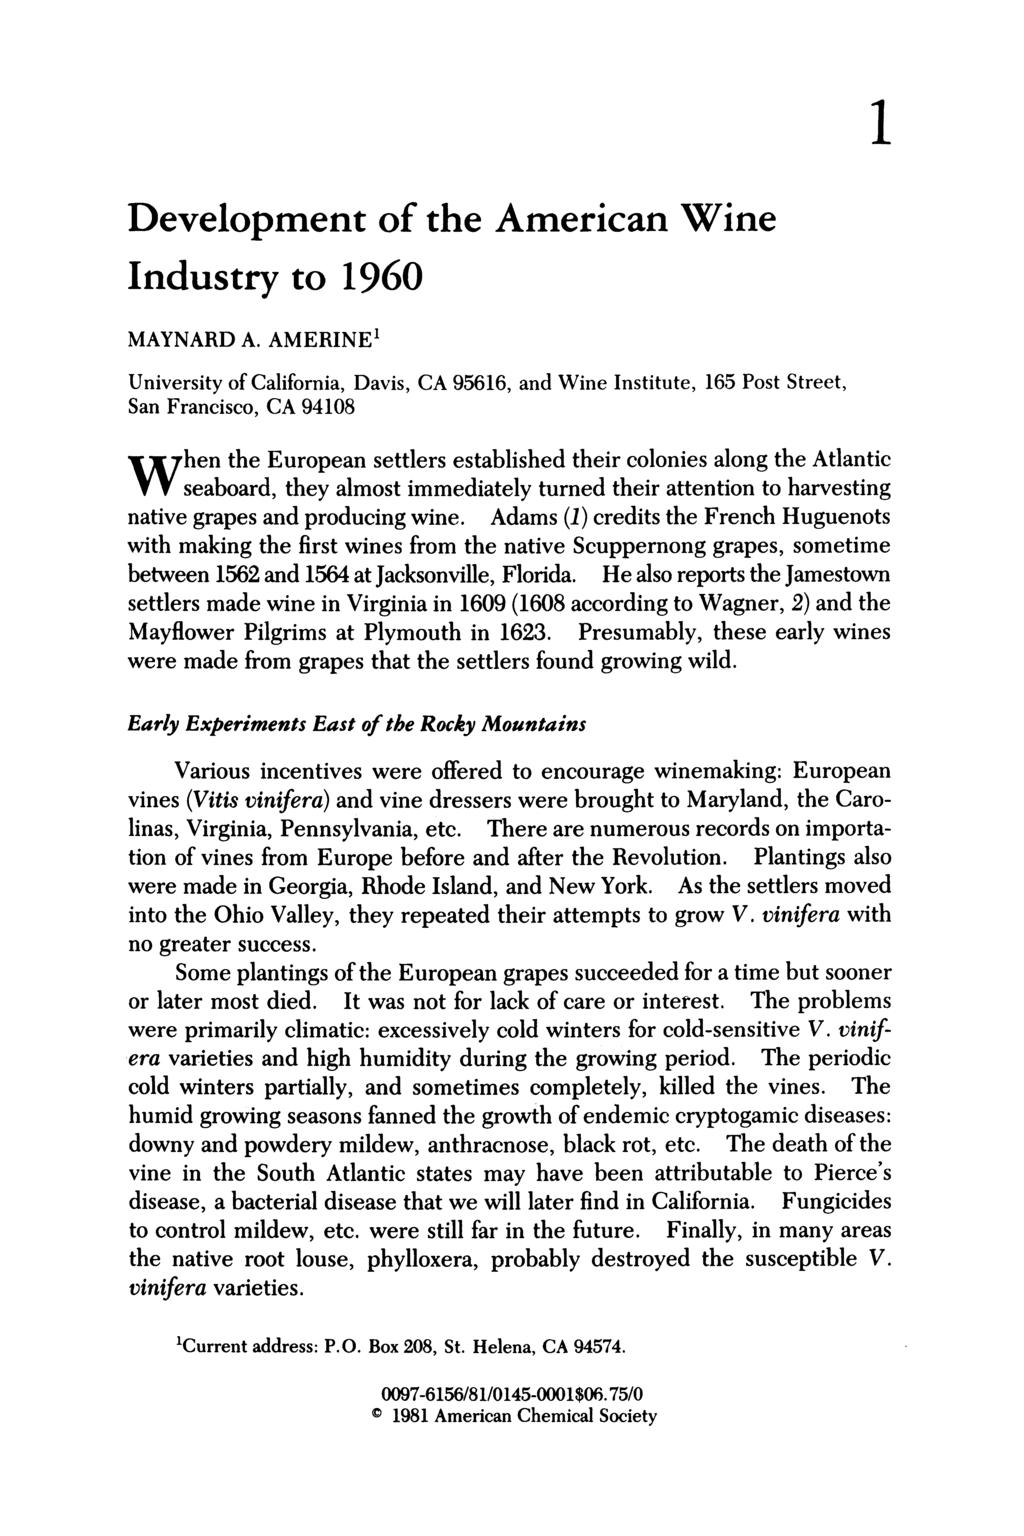 1 Development of the American Wine Industry to 1960 Downloaded via 148.251.232.83 on September 19, 2018 at 03:23:27 (UTC). See https://pubs.acs.